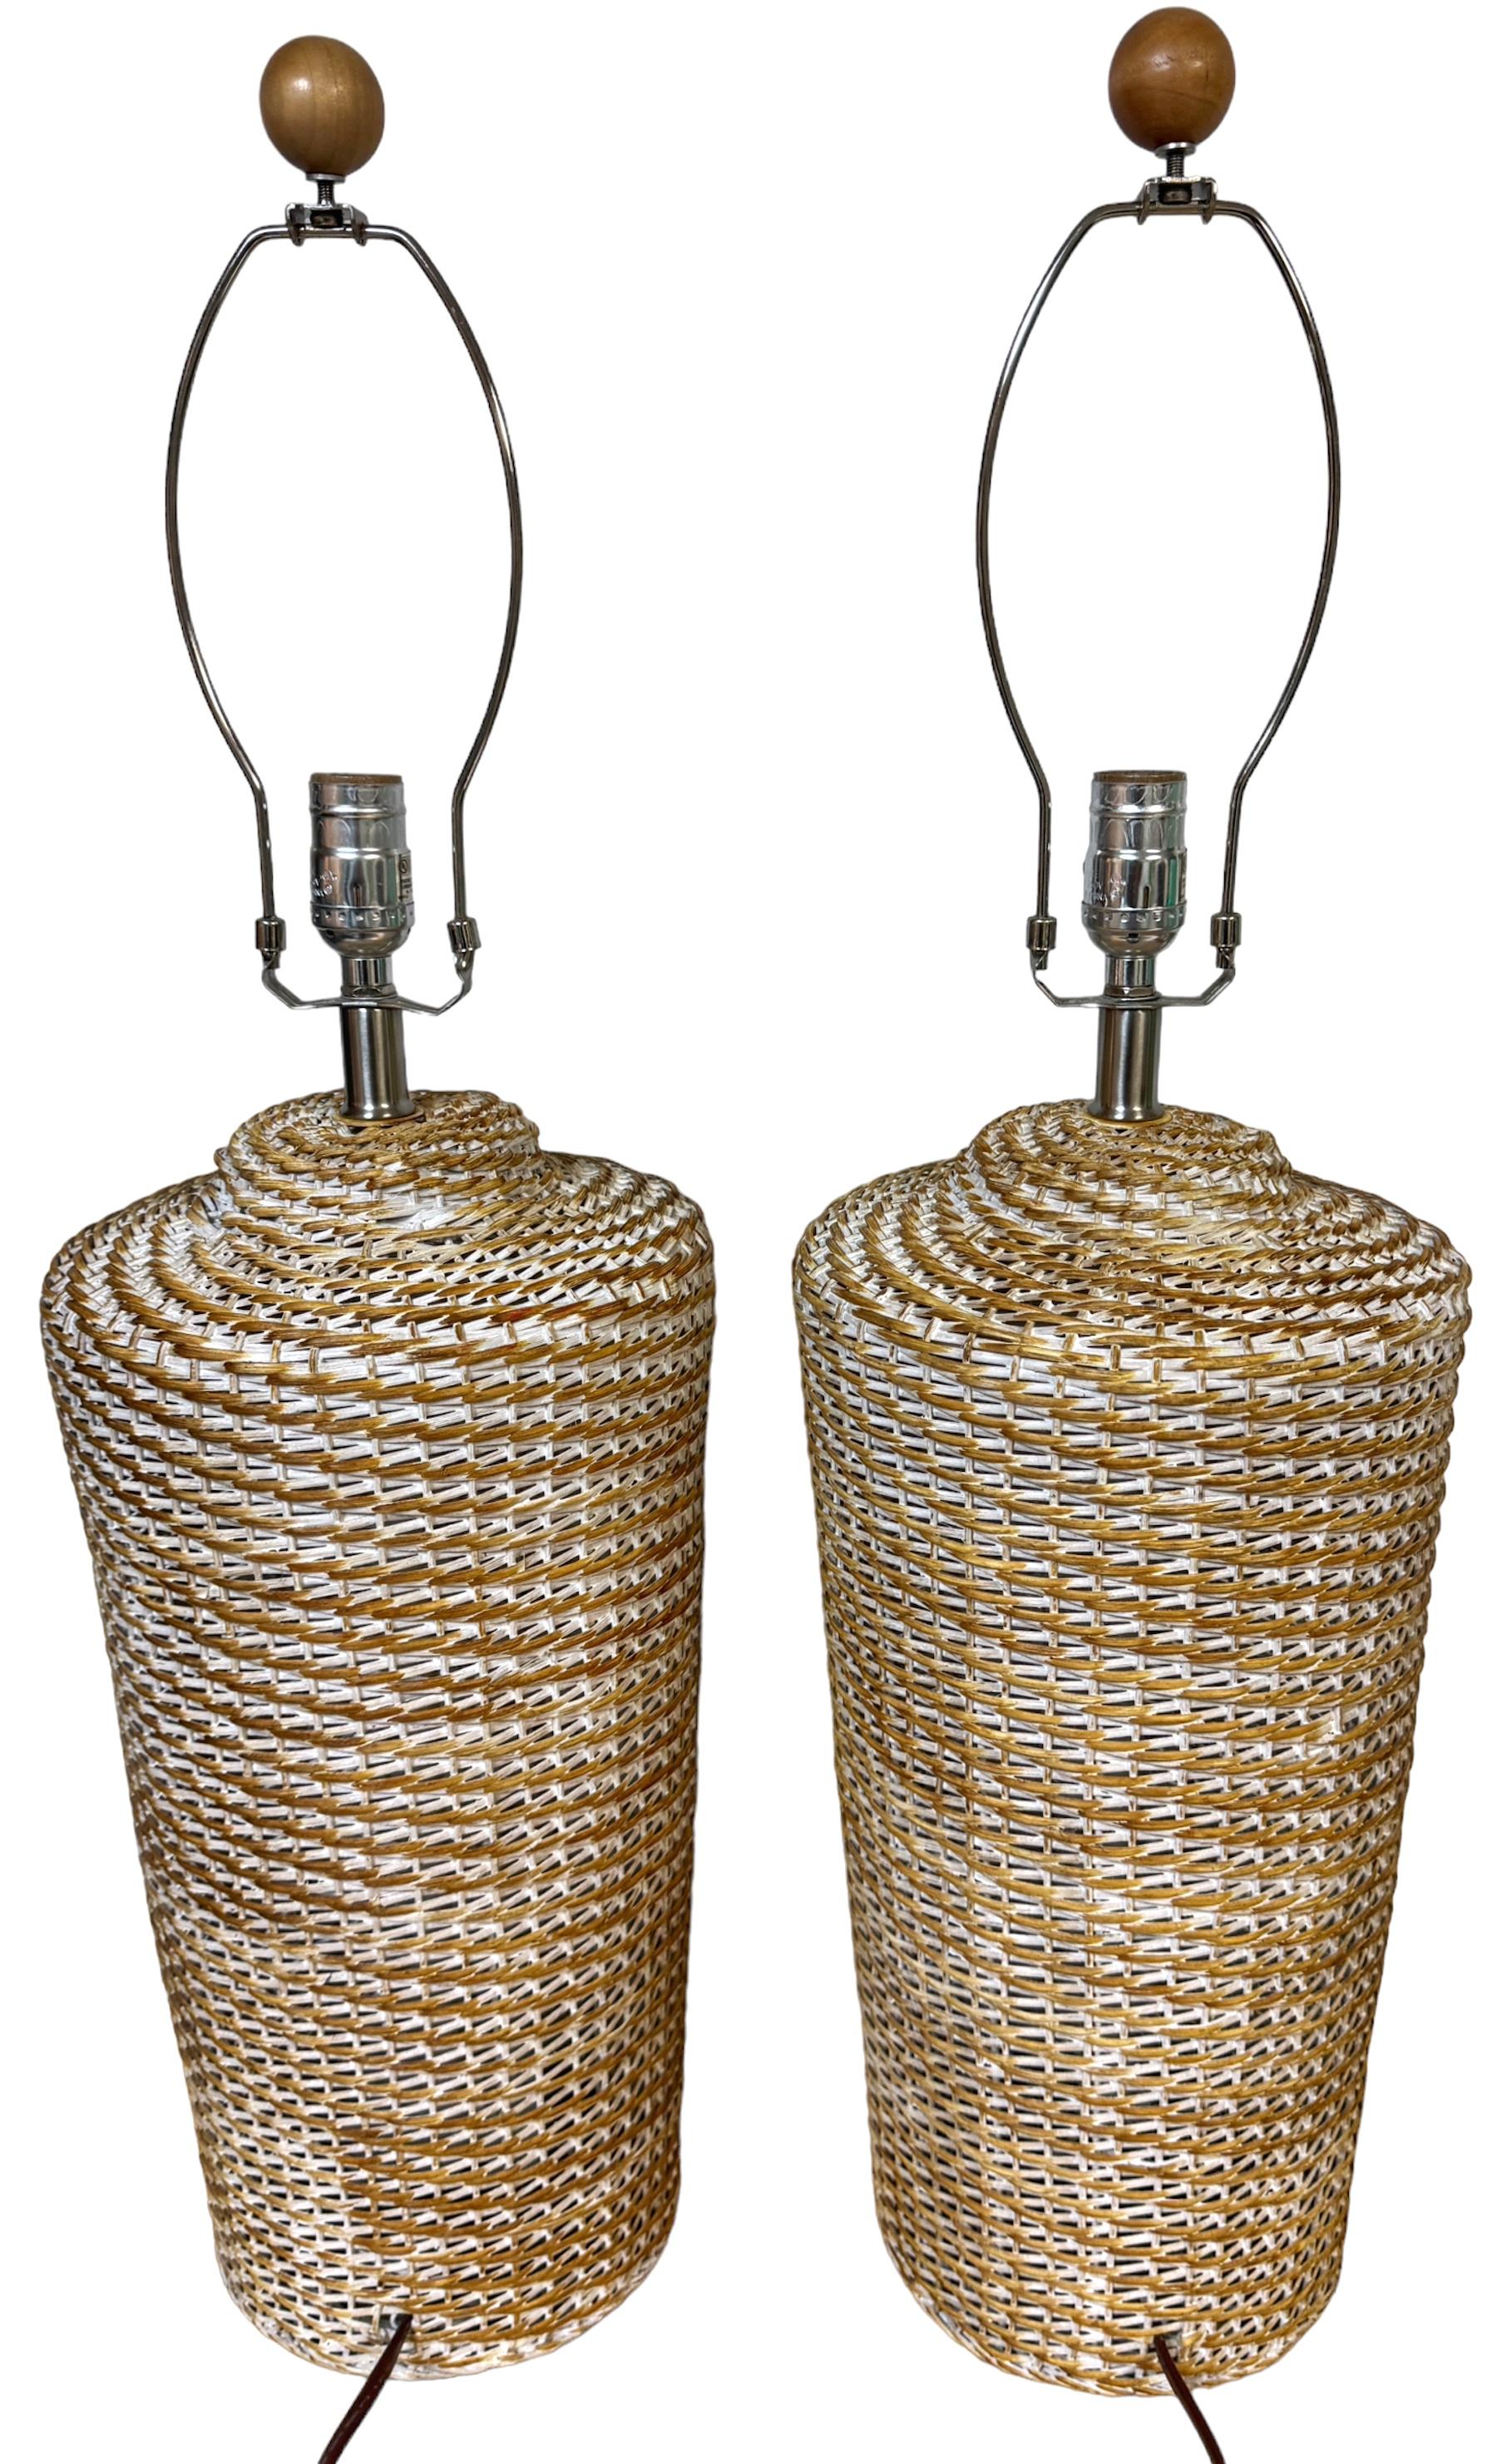 Pair of Coastal Modern White-Polychromed Woven Rattan Lamps  In Good Condition For Sale In West Palm Beach, FL